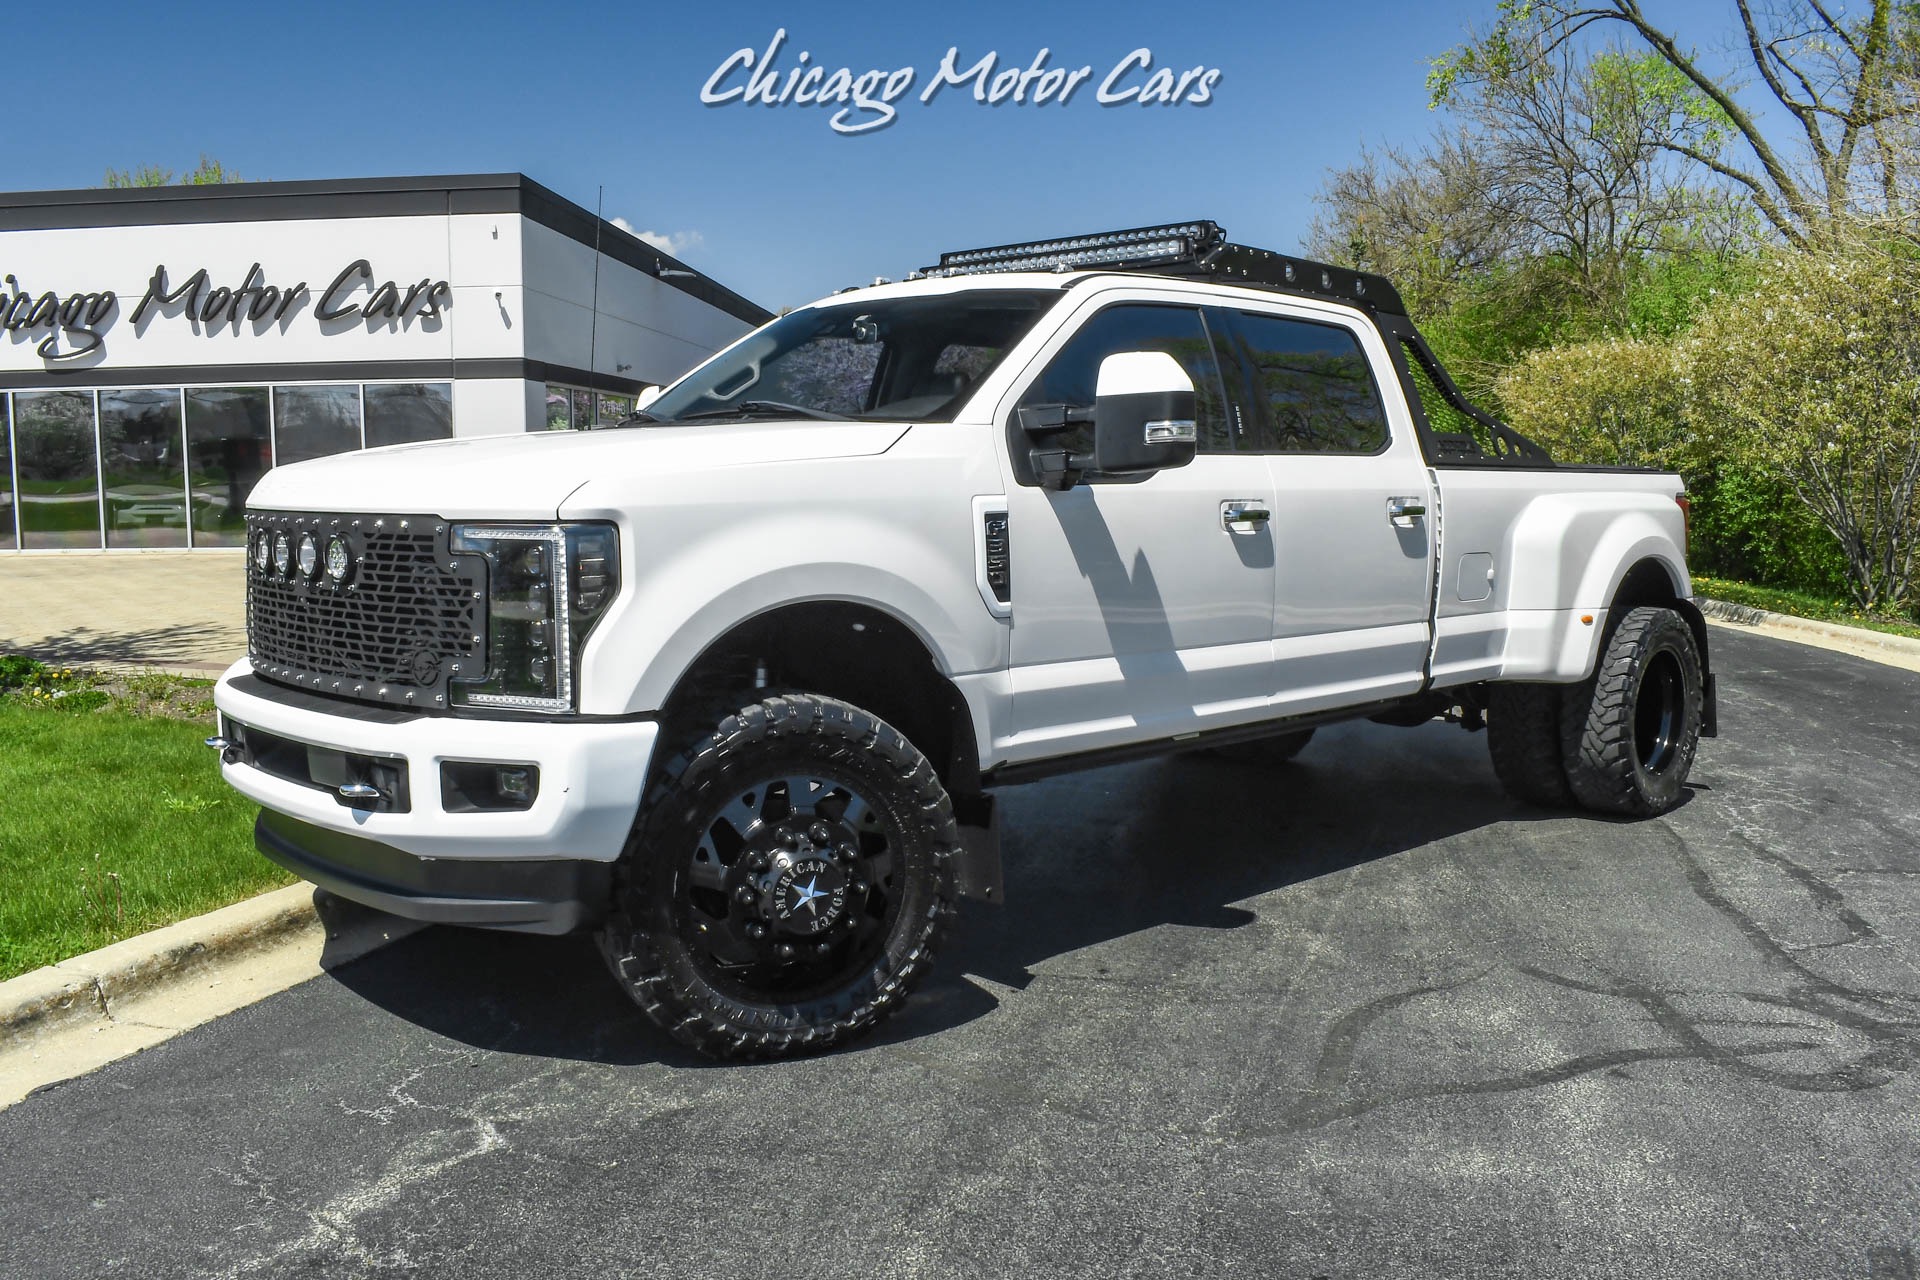 Used 2017 Ford F-350 Super Duty Lariat Crew Cab 4x4 SEMA TRUCK Lariat Crew  Cab 4x4 6.7L Powerstroke Diesel + Upgrades! For Sale (Special Pricing) |  Chicago Motor Cars Stock #18251